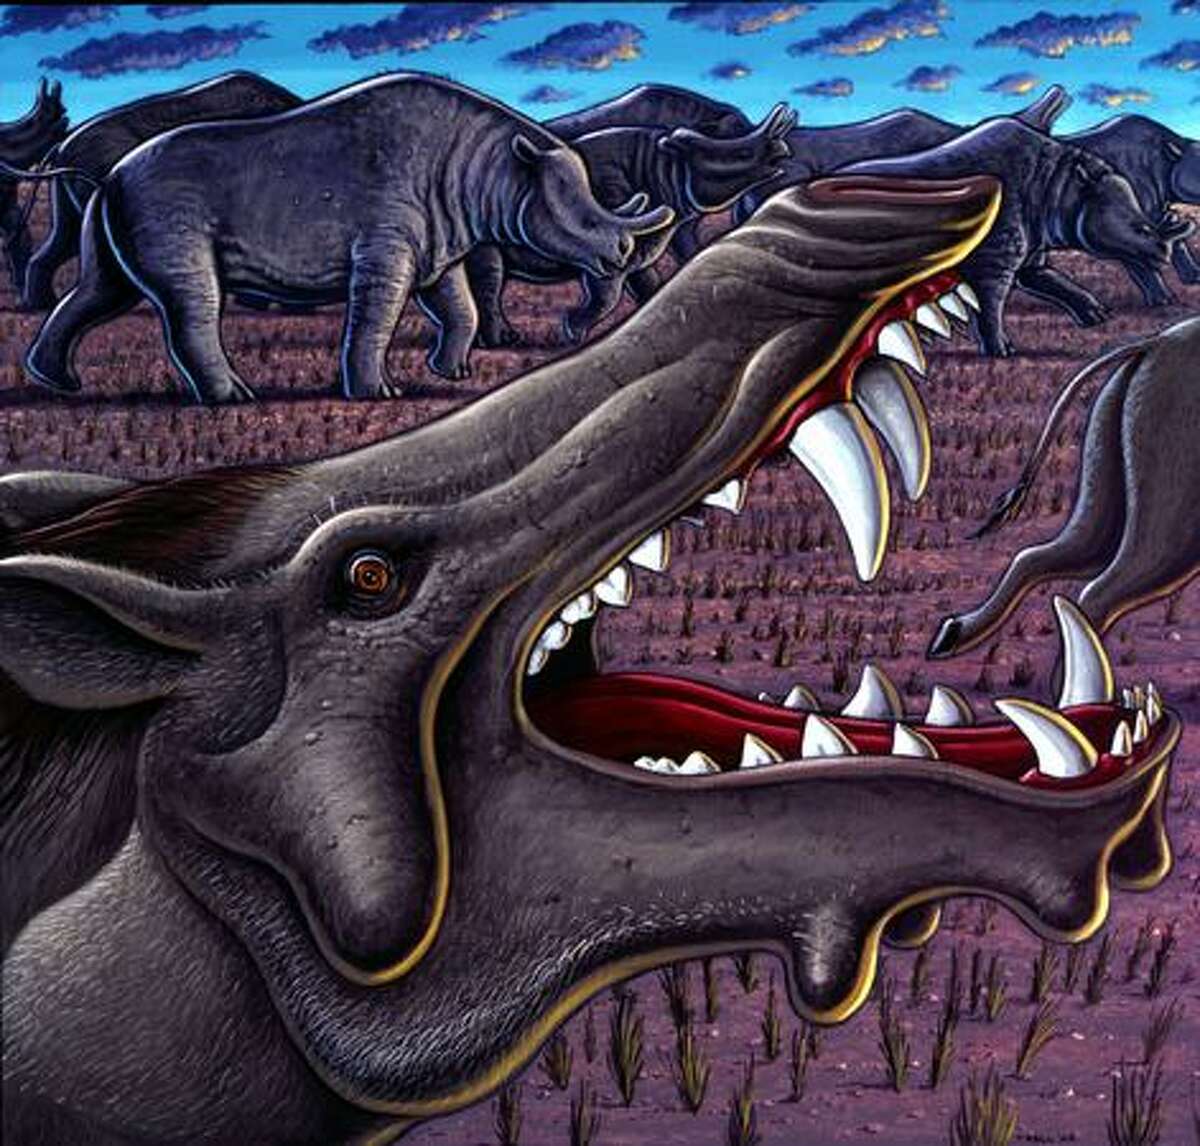 Killer pigs and titanotheres, by Ray Troll. On view in Cruisin' the Fossil Freeway, December 19, 2009 – May 3, 2010, Burke Museum, Seattle.